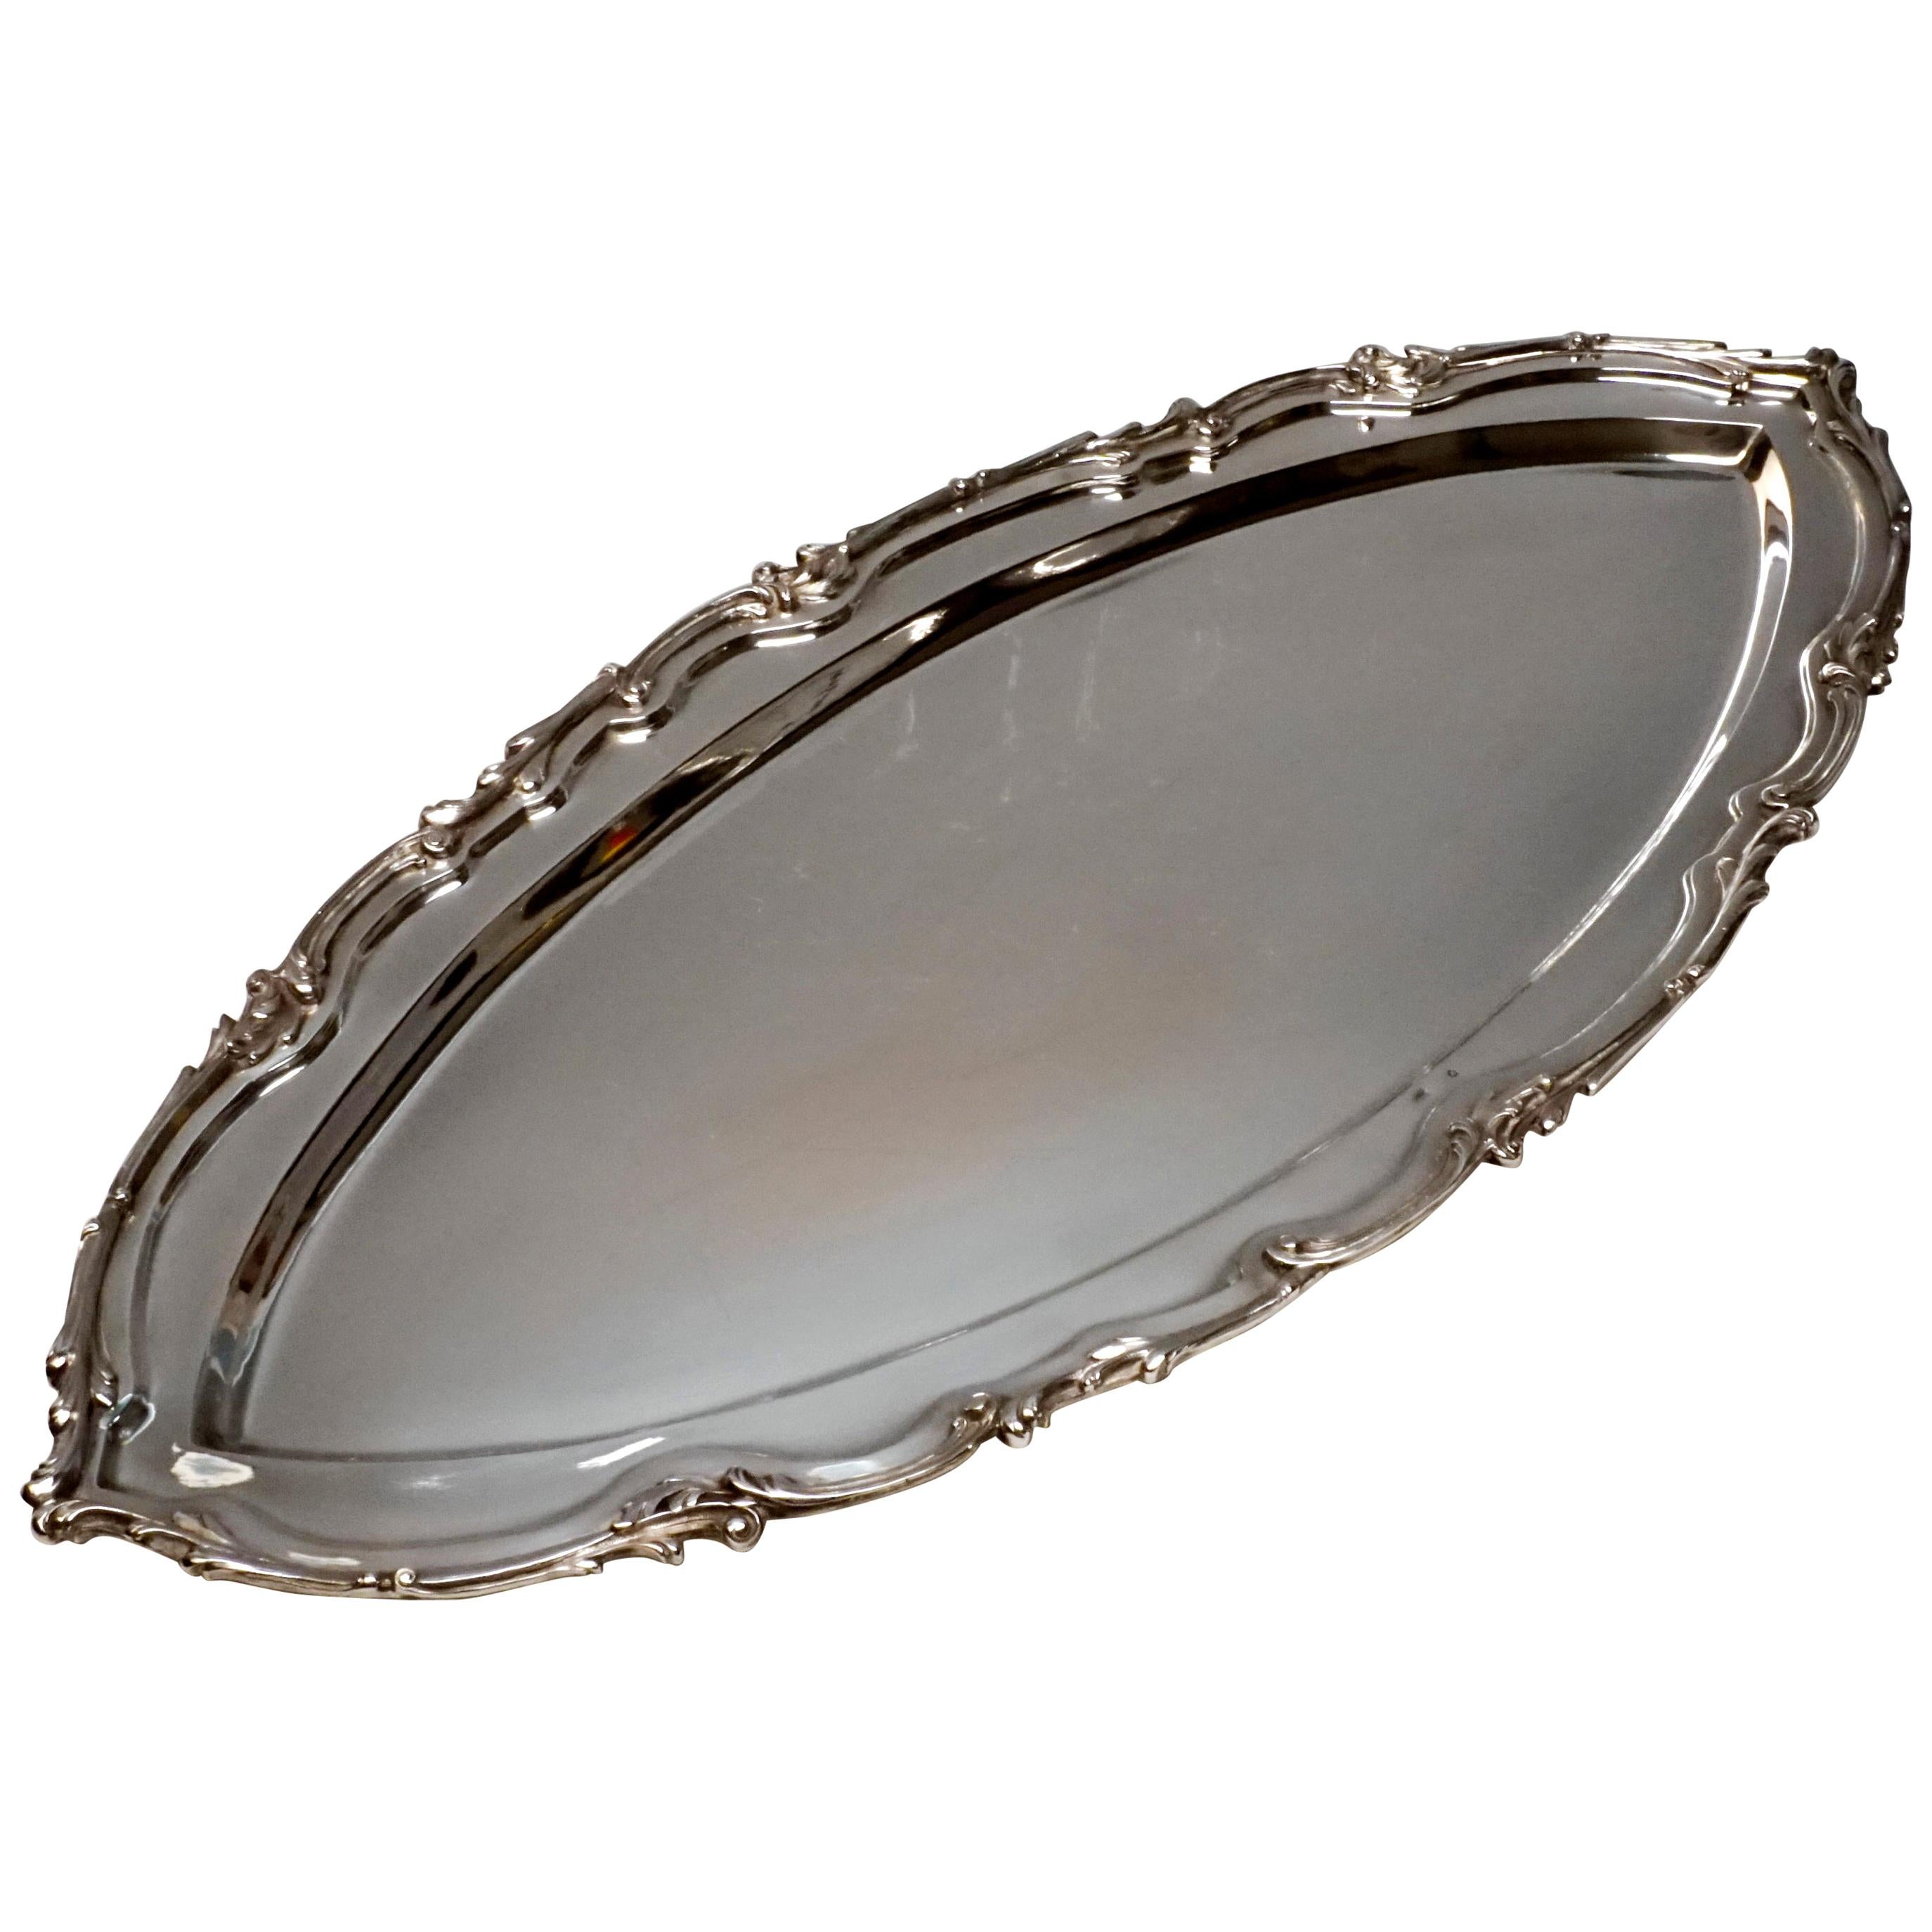 Large Viennese Art Nouveau Silver Platter in the Shape of a Boat, circa 1900